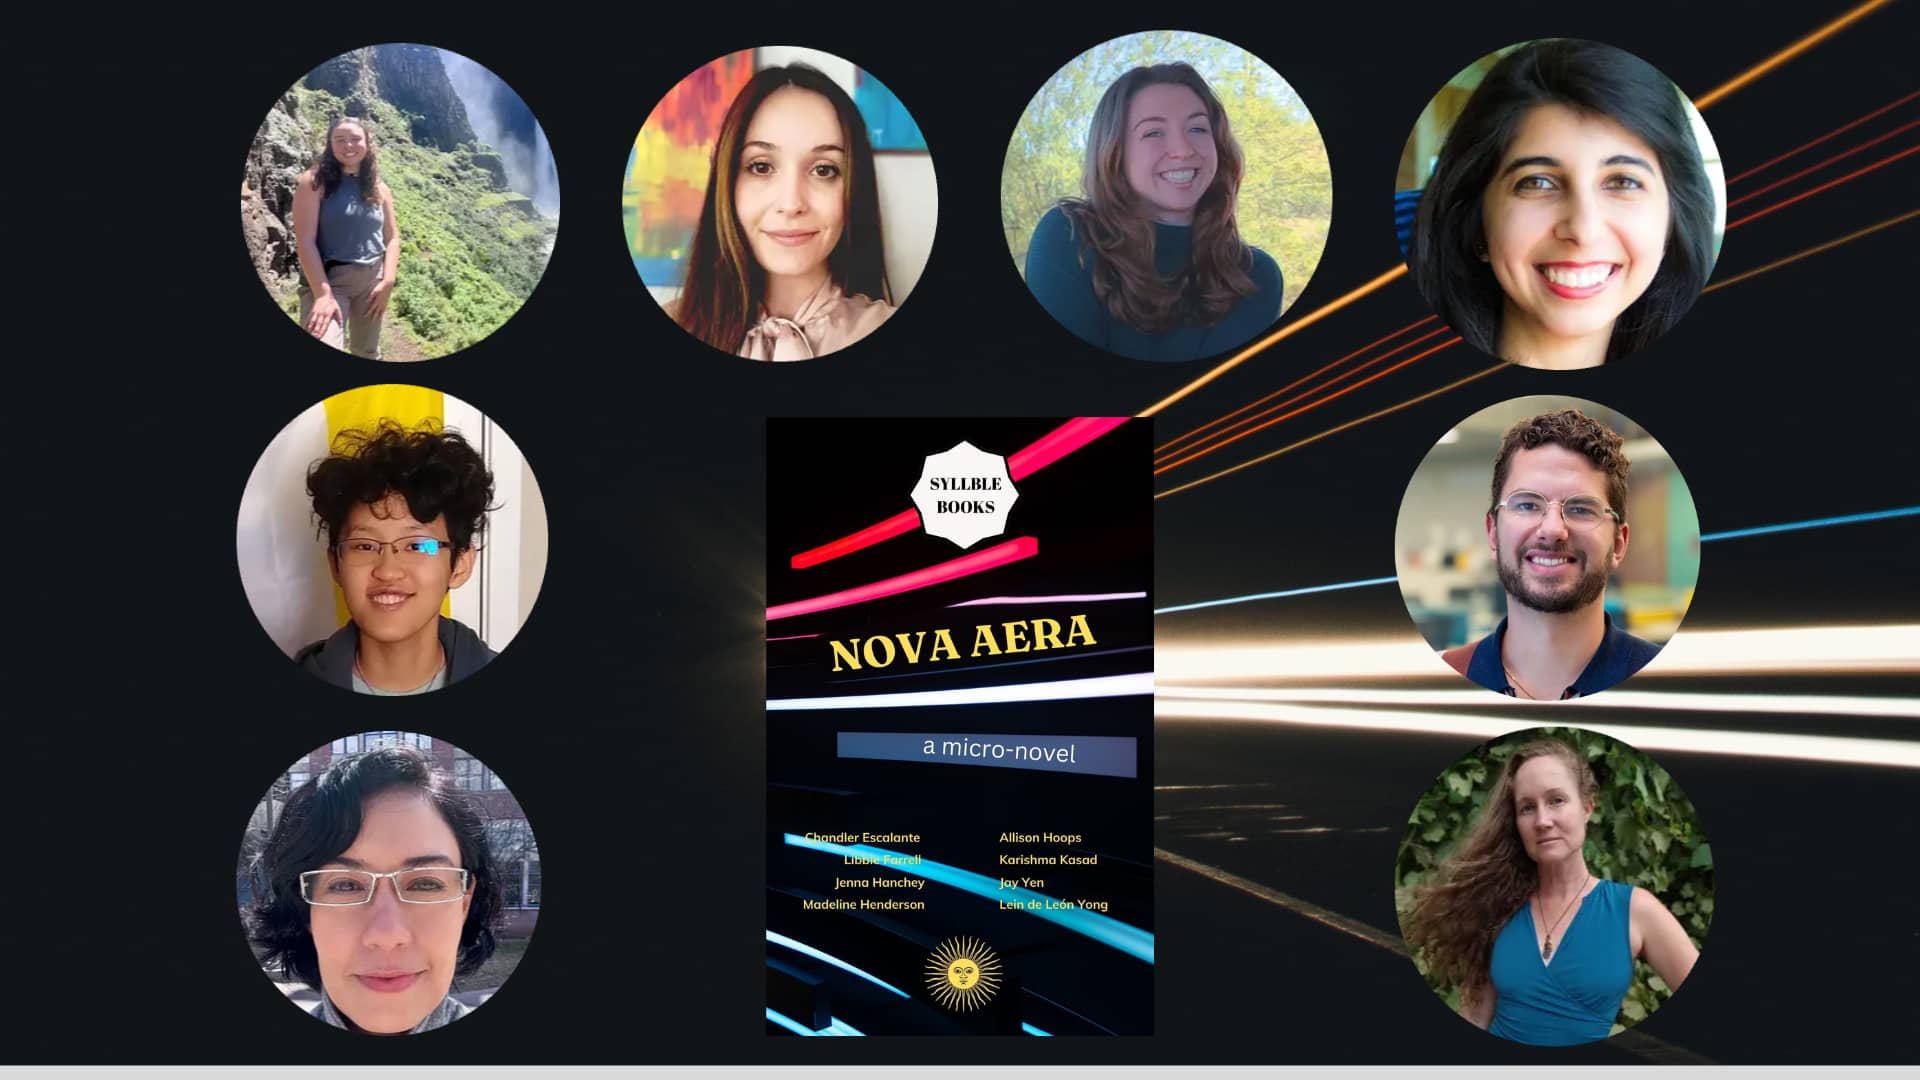 The Nova Aera Artist Collective From Arizona State University Publishes Their Debut Collaborative Science Fiction Novel